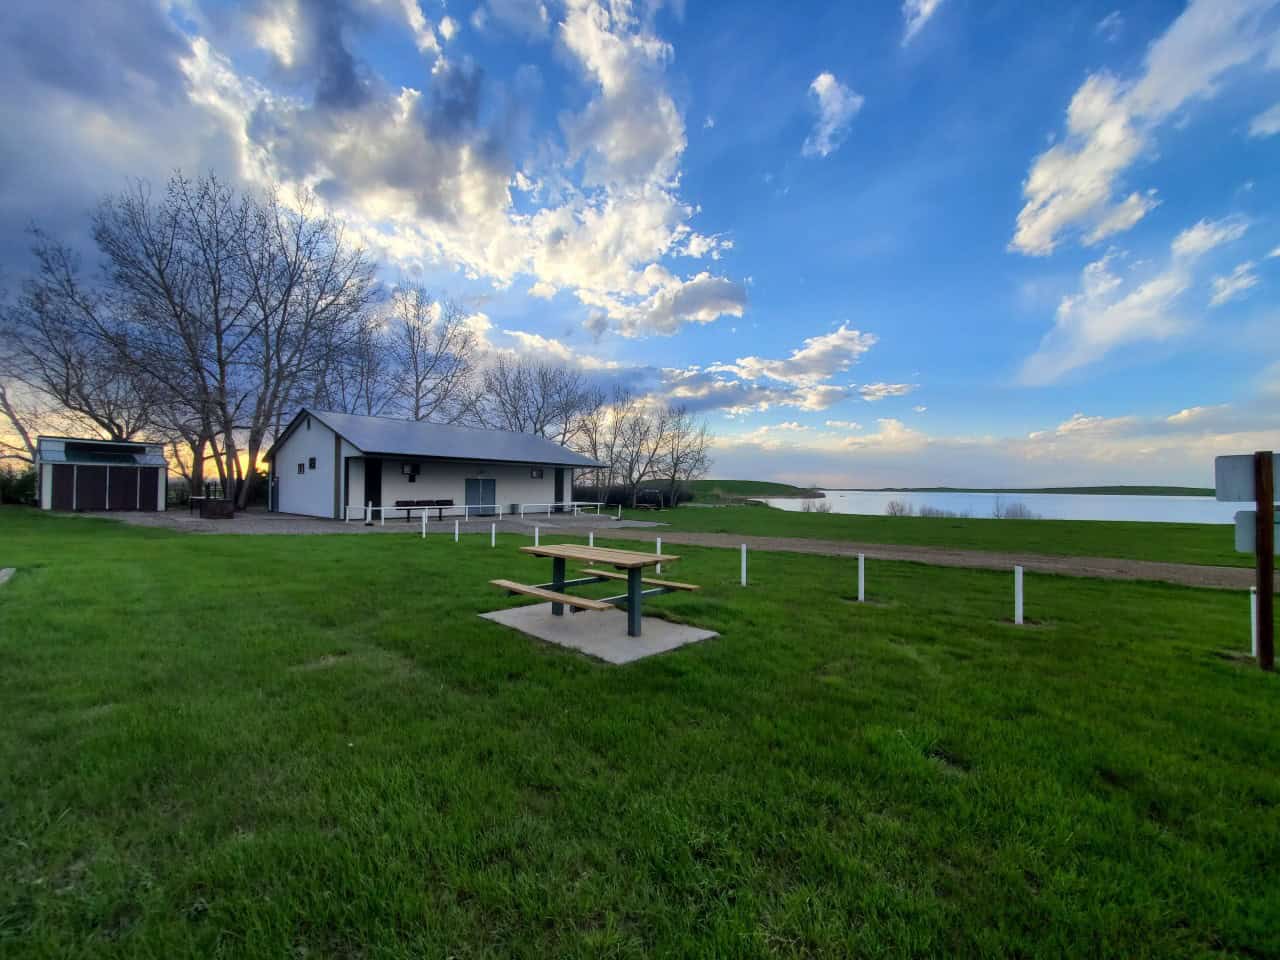 Clear Lake Park Stavely Elks  - The hall is available for event rentals through the Stavely Elks Club. A beautiful spot for a family reunion or wedding style event. With picnic tables, bbqs a playground and large green space